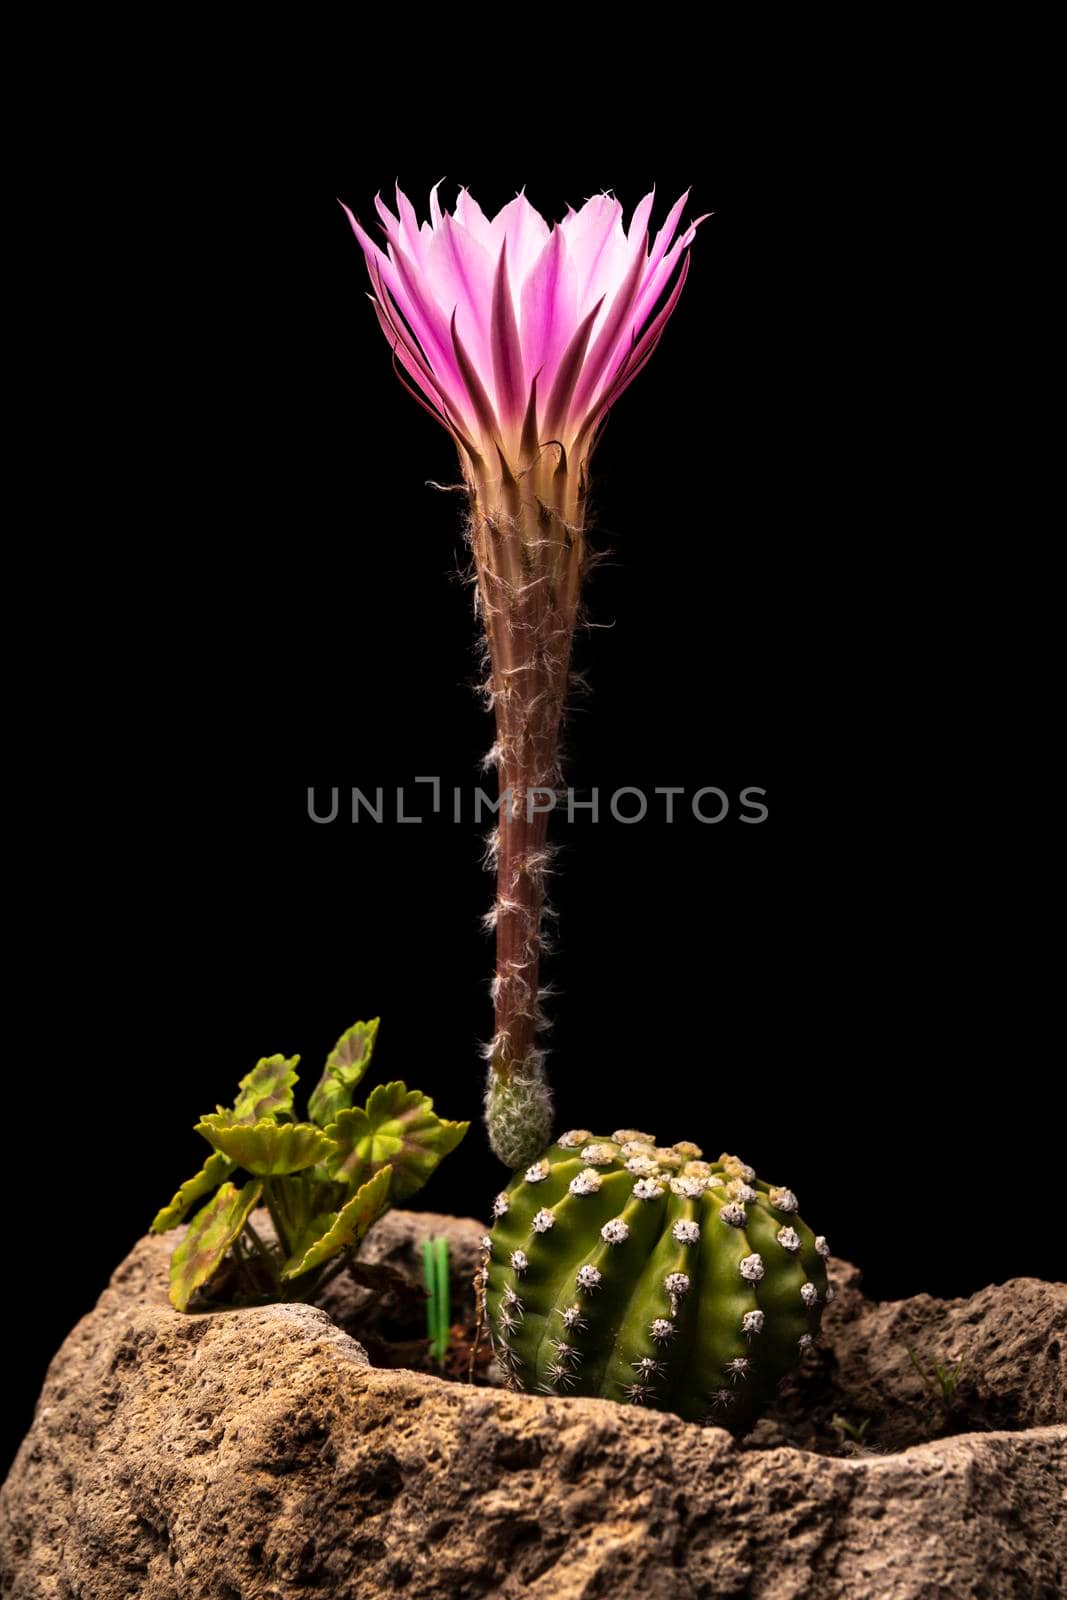 Echinopsis subdenudata commonly called Domino Cactus. Cactus blooming (Easter Lily Cactus) on black background